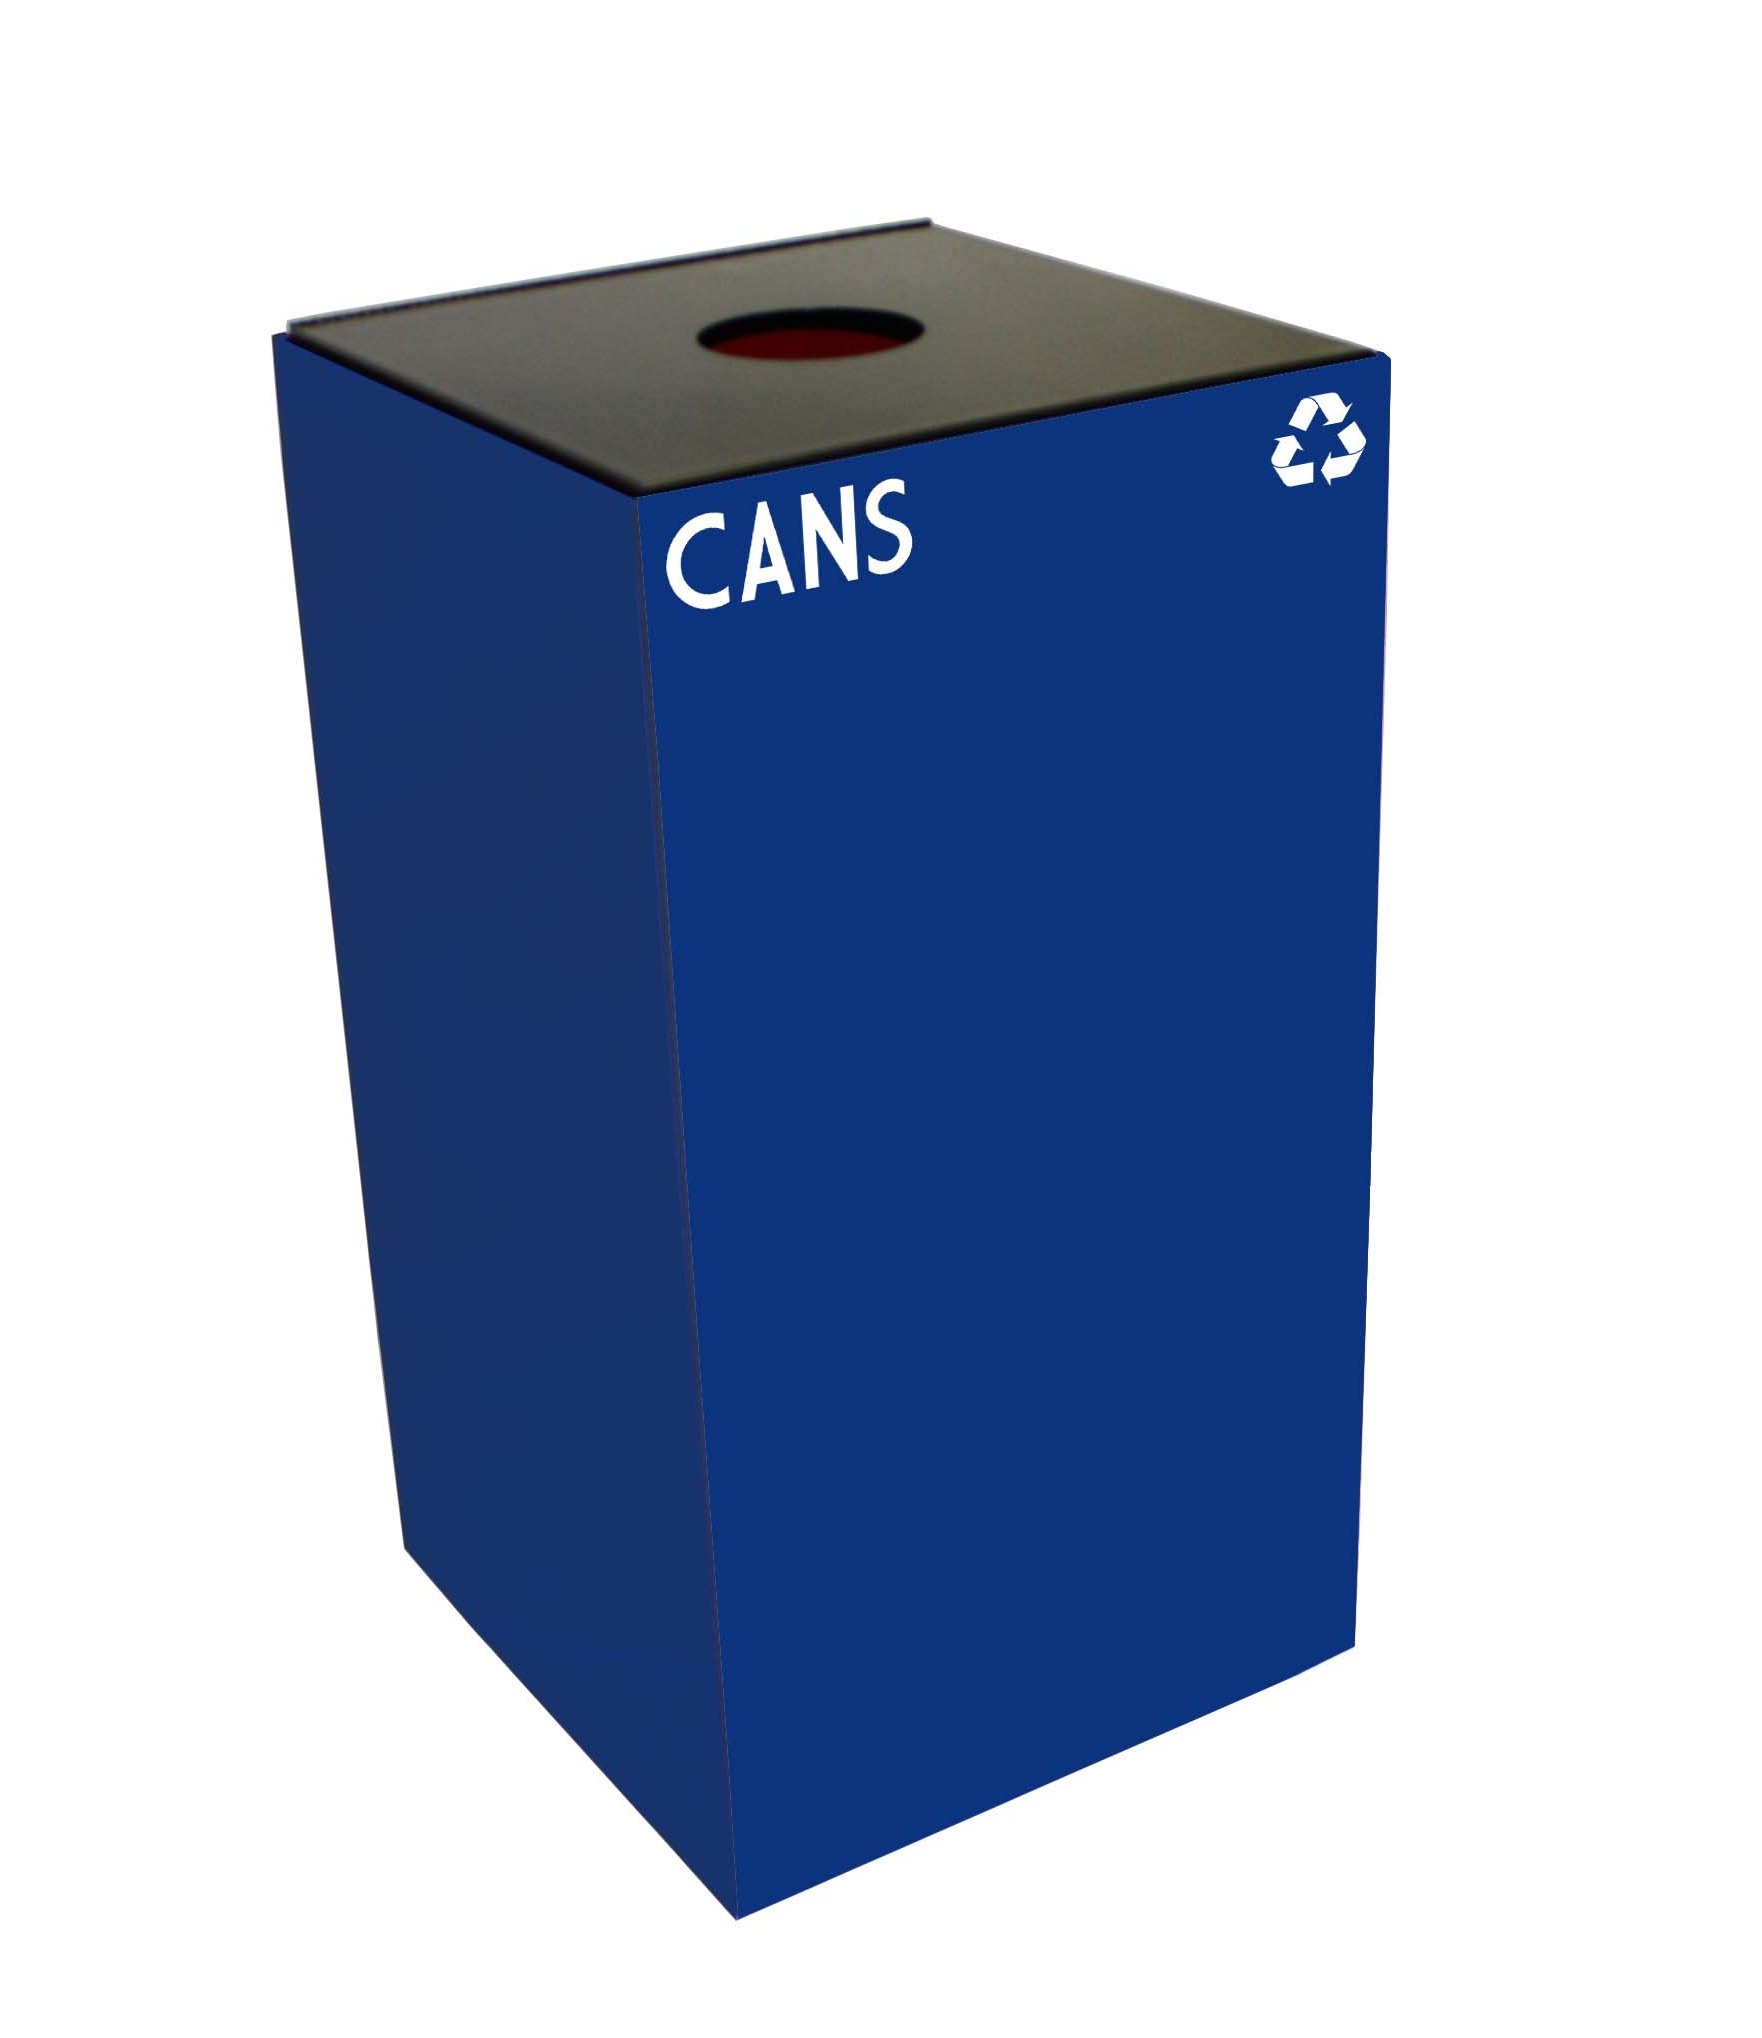 Indoor Square Recycling Cans Container